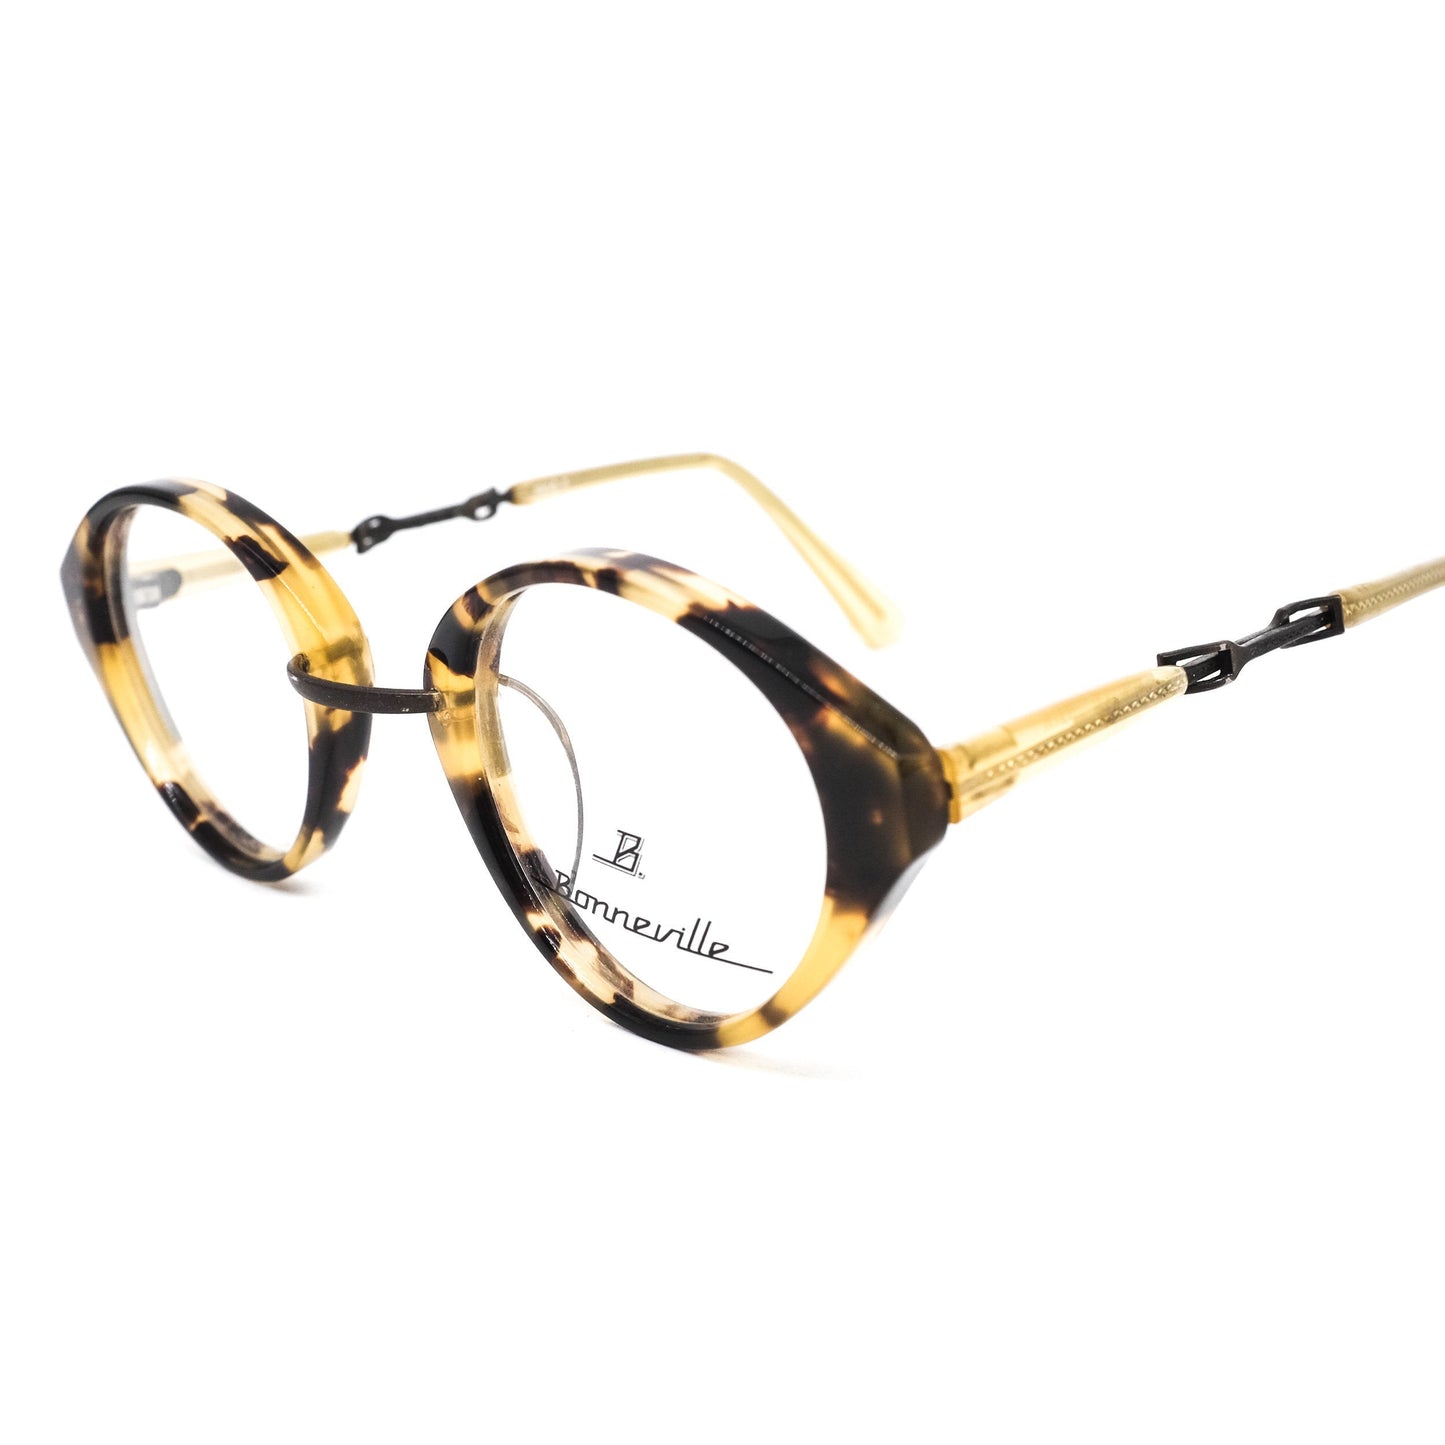 Bonneville vintage brown tortoise round cello eyeglasses frames Made in Germany with special temples design, NOS 1990s